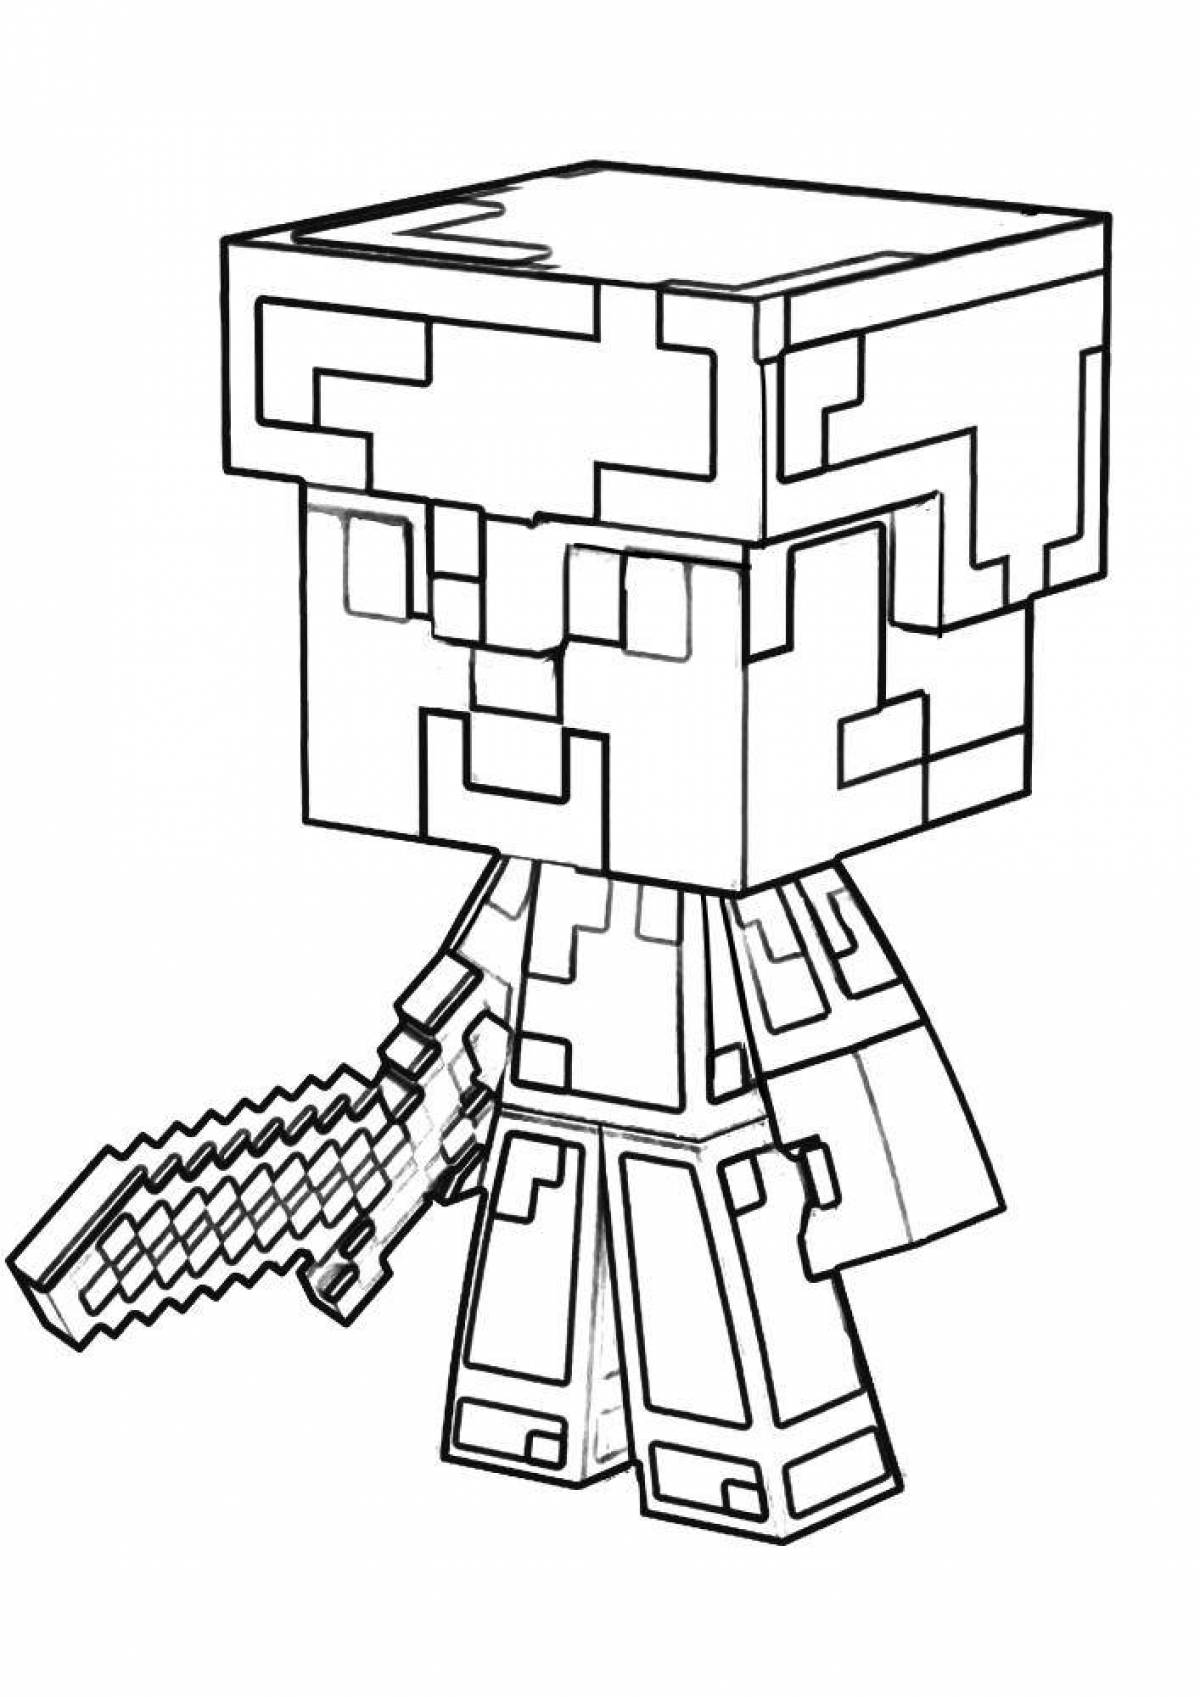 Colorfully illustrated minecraft man coloring page